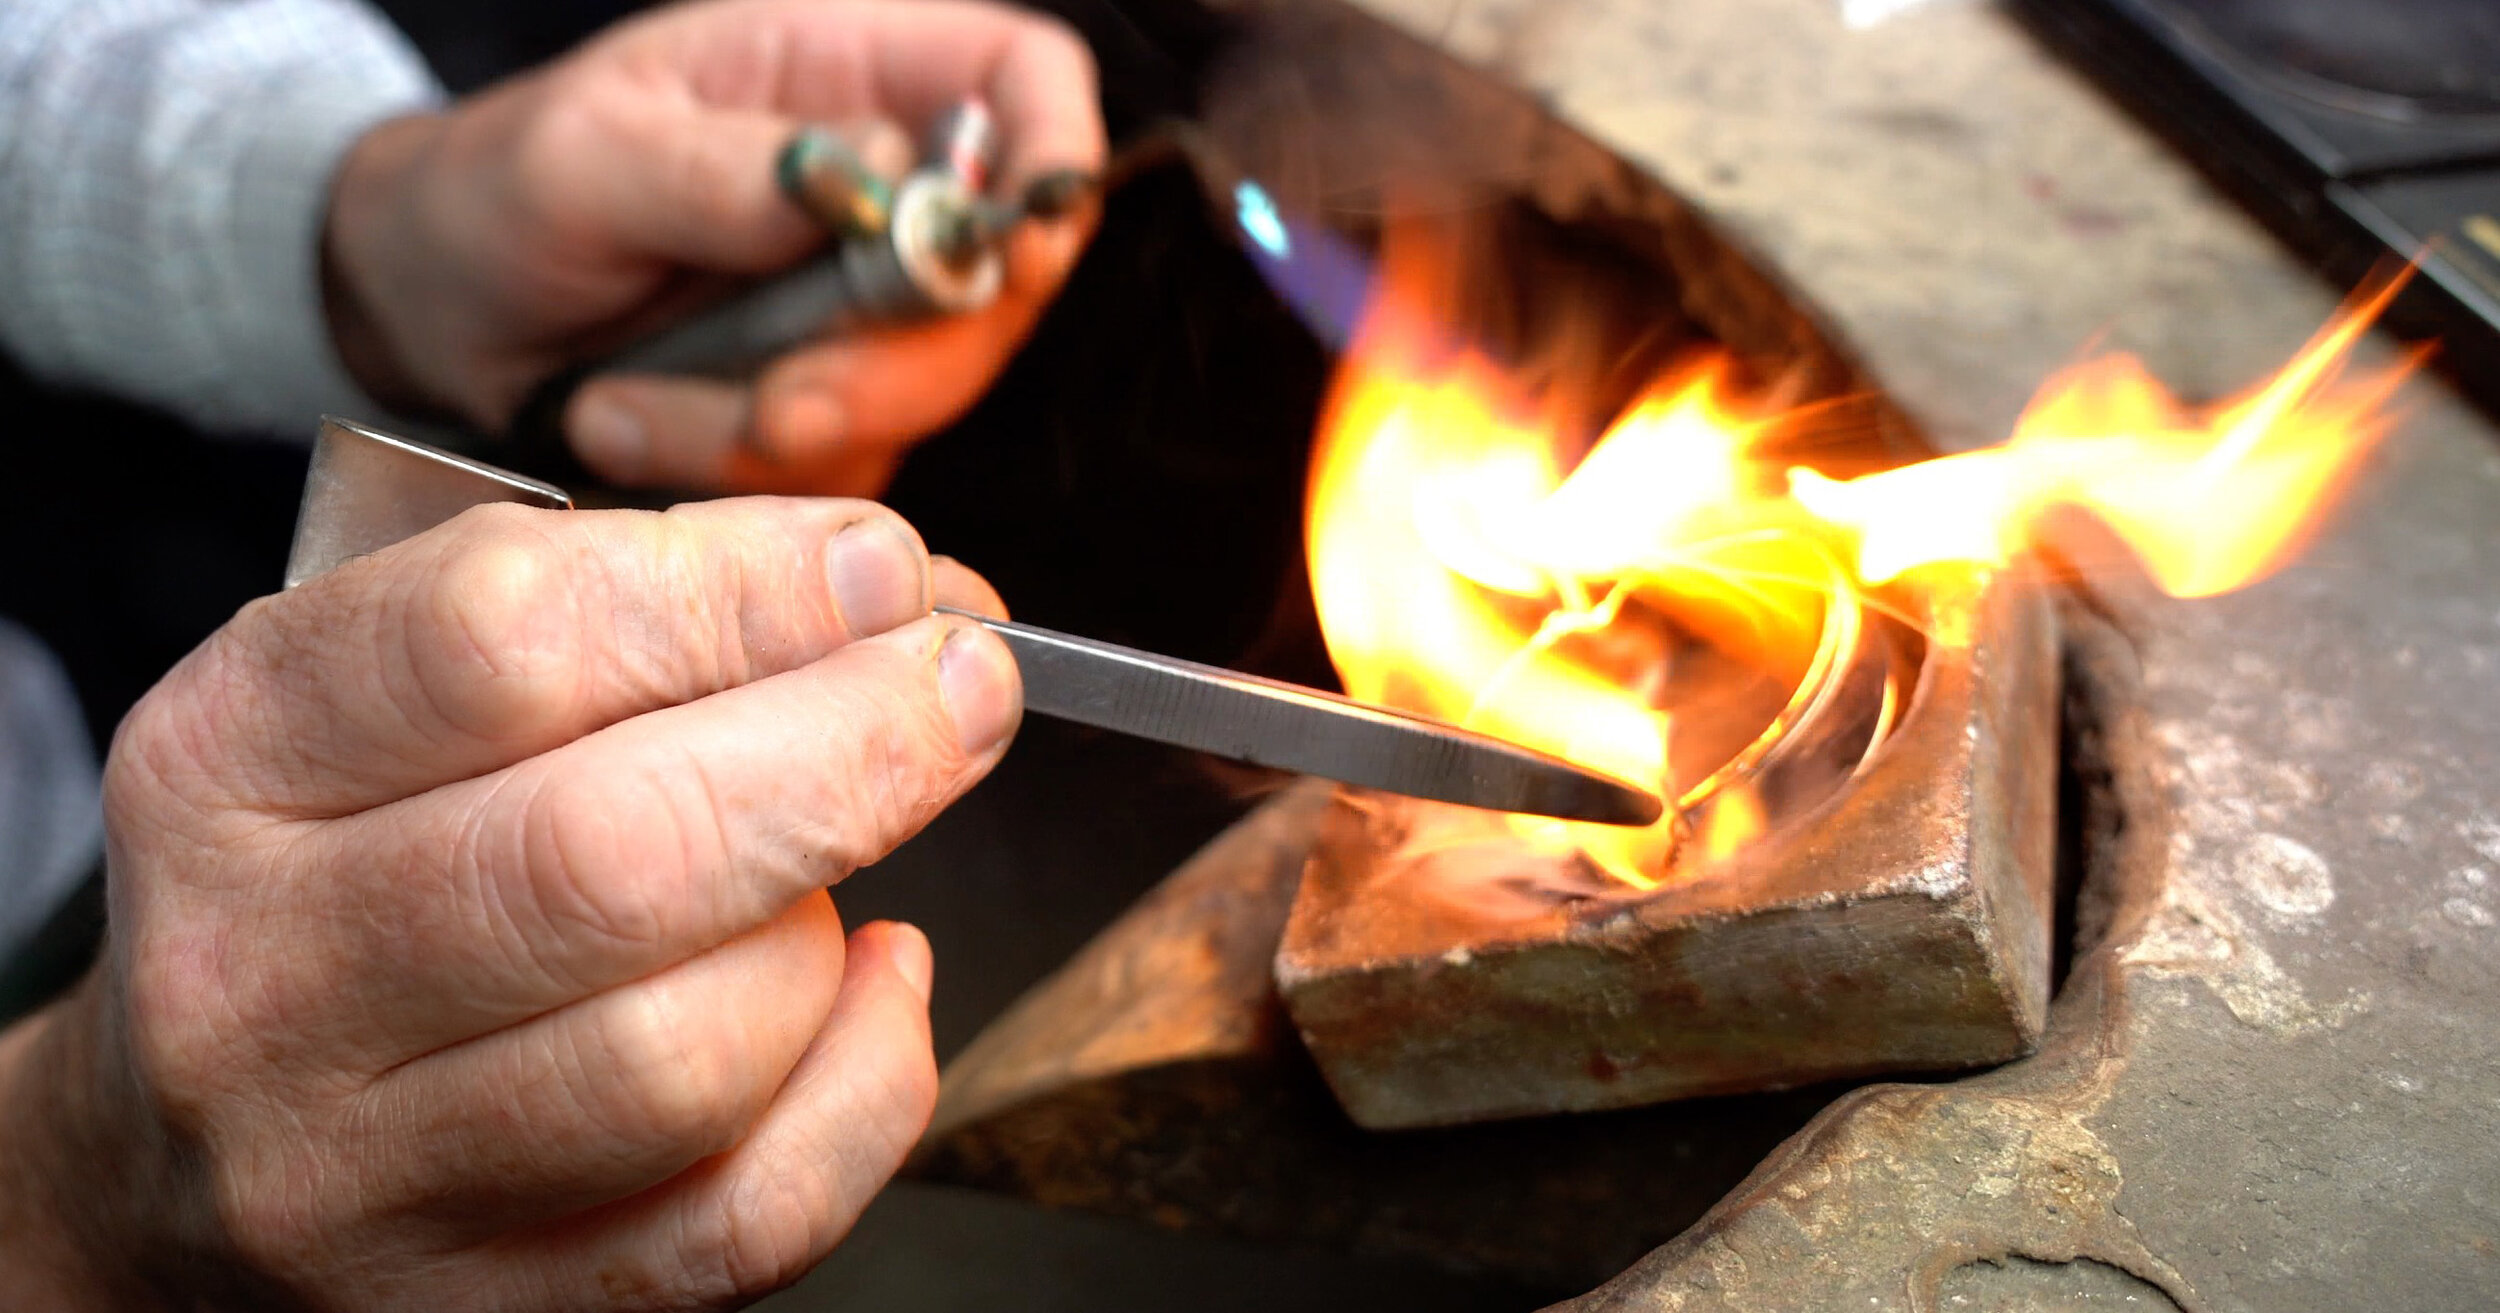  The material added to the inside of the bangle igniting during the melt. 